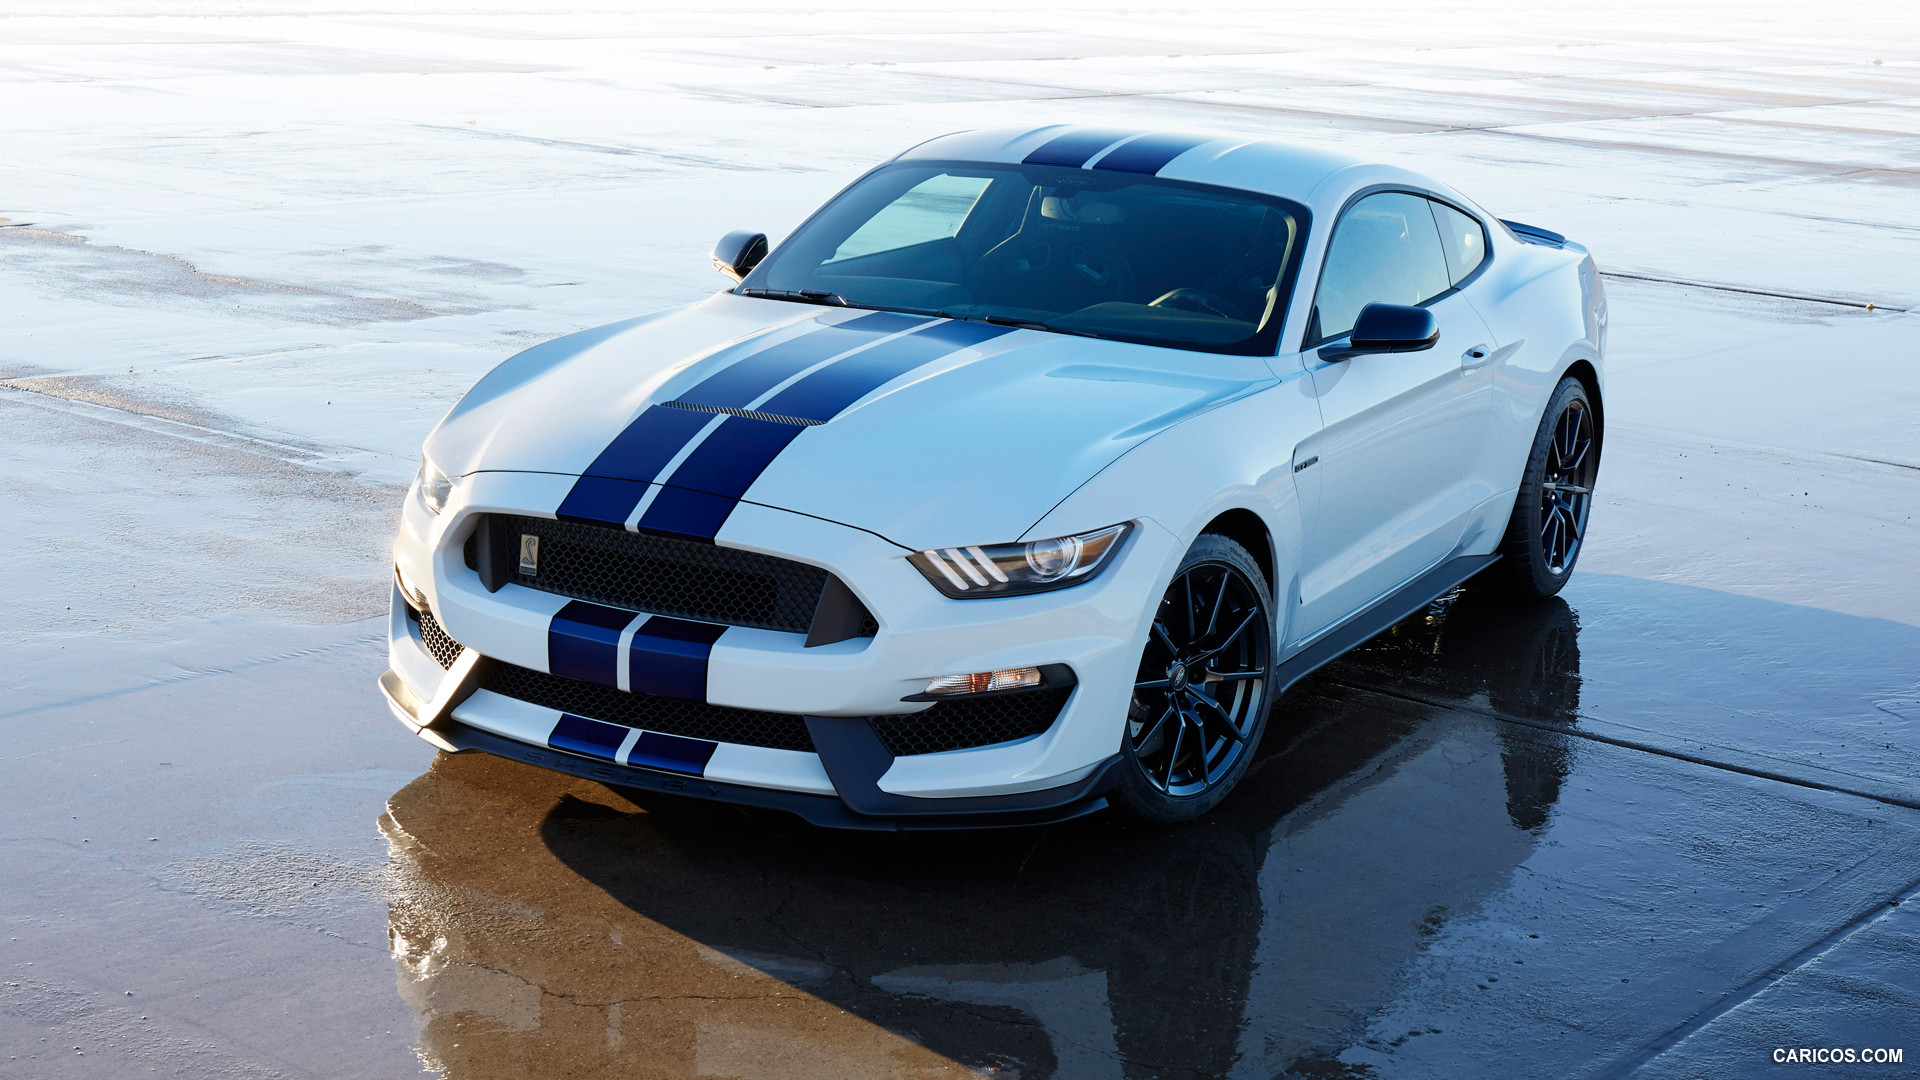 Ford Mustang Gt350 Wallpapers Vehicles Hq Ford Mustang Gt350 Pictures 4k Wallpapers 2019